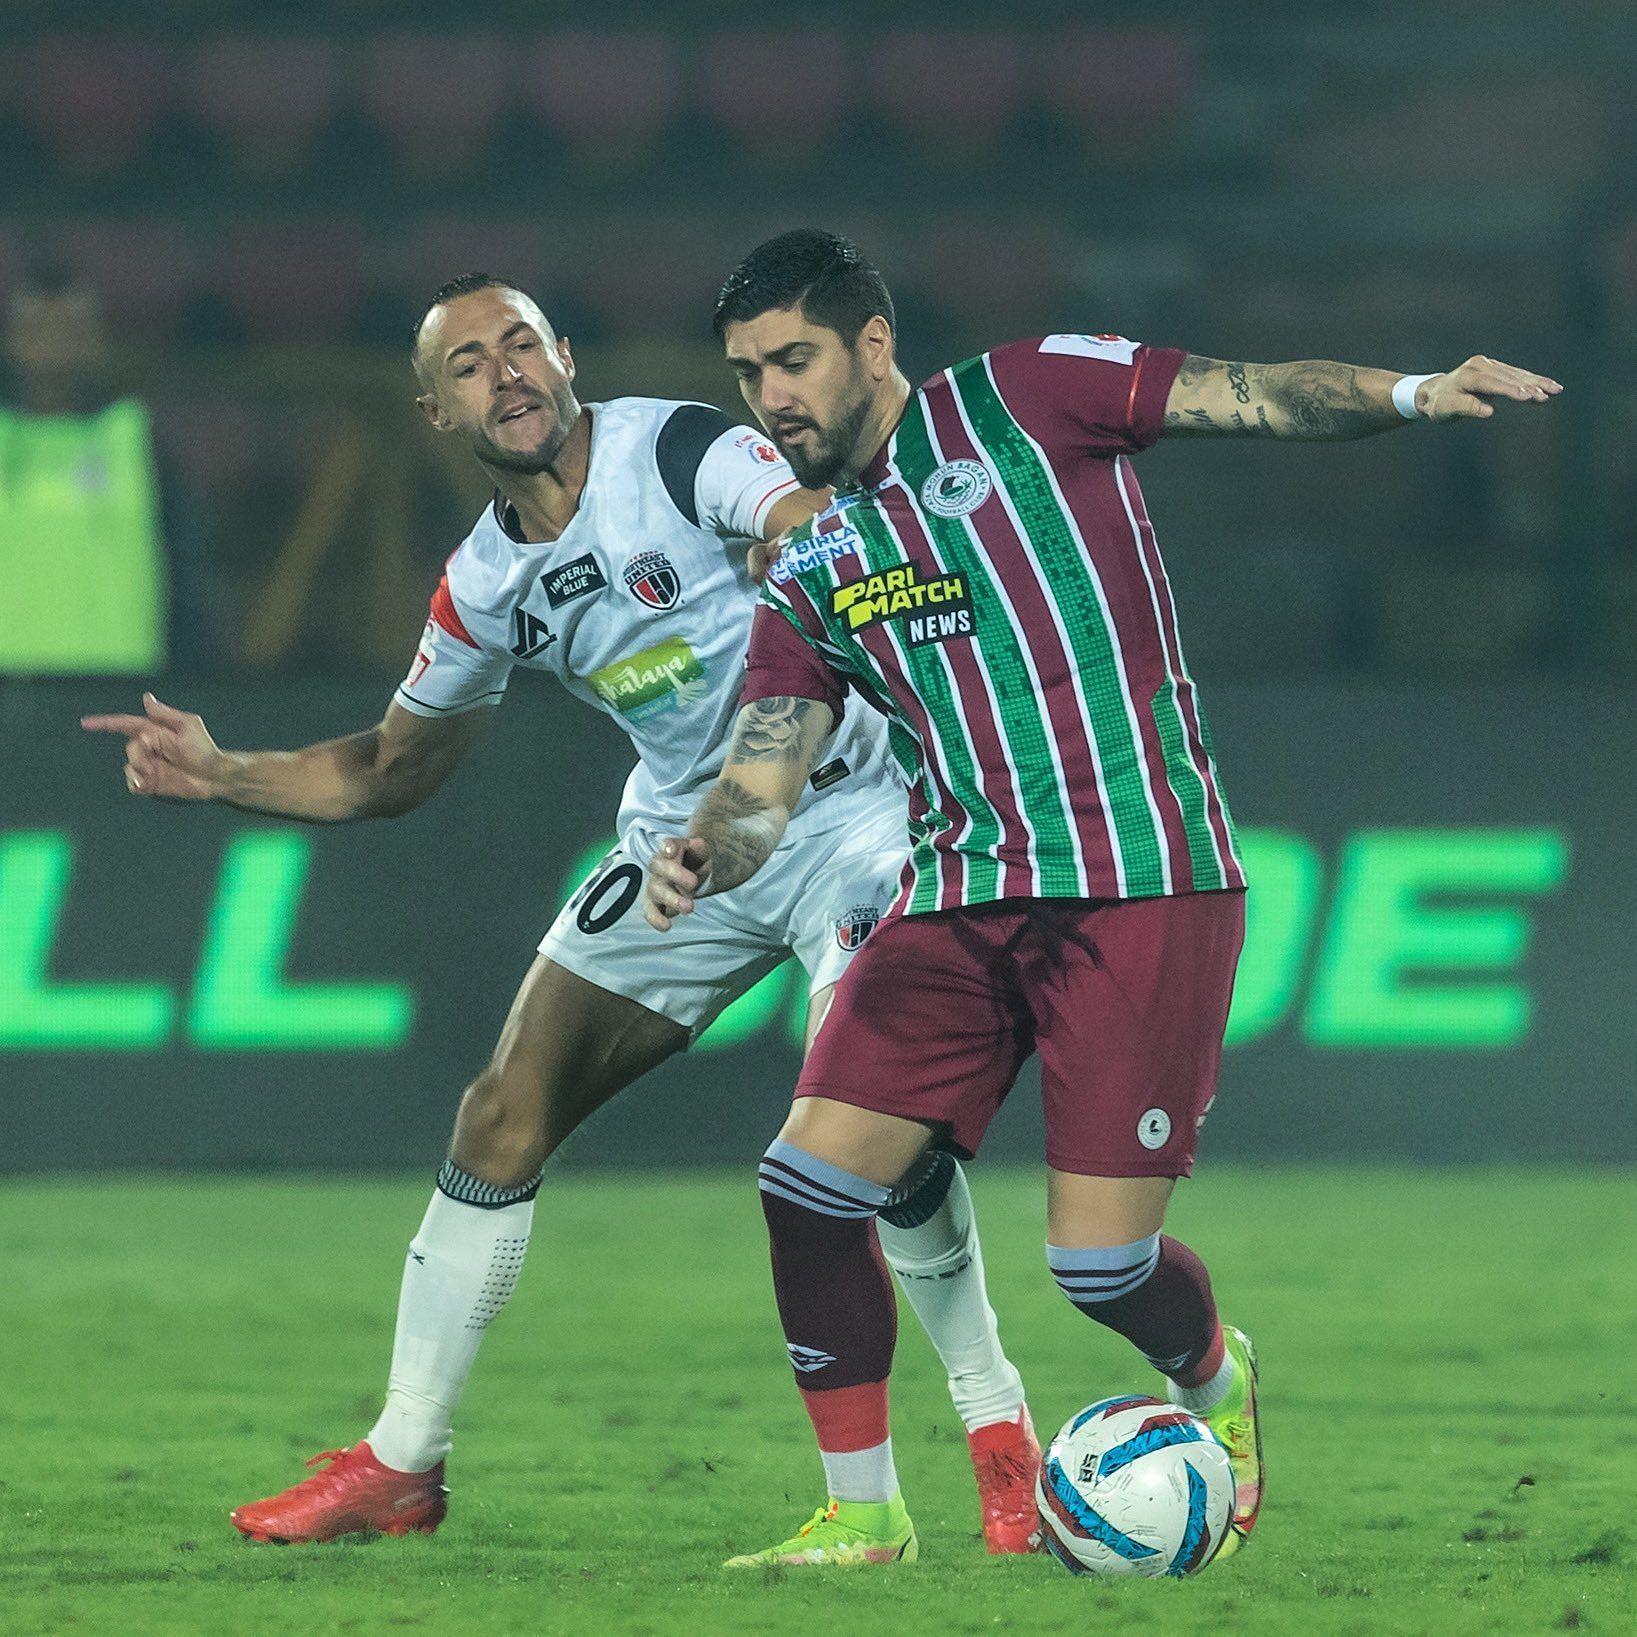 Can ATK Mohun Bagan bounce back after their defeat in Matchweek 12? (Image Courtesy: ATK Mohun Bagan FC Twitter)